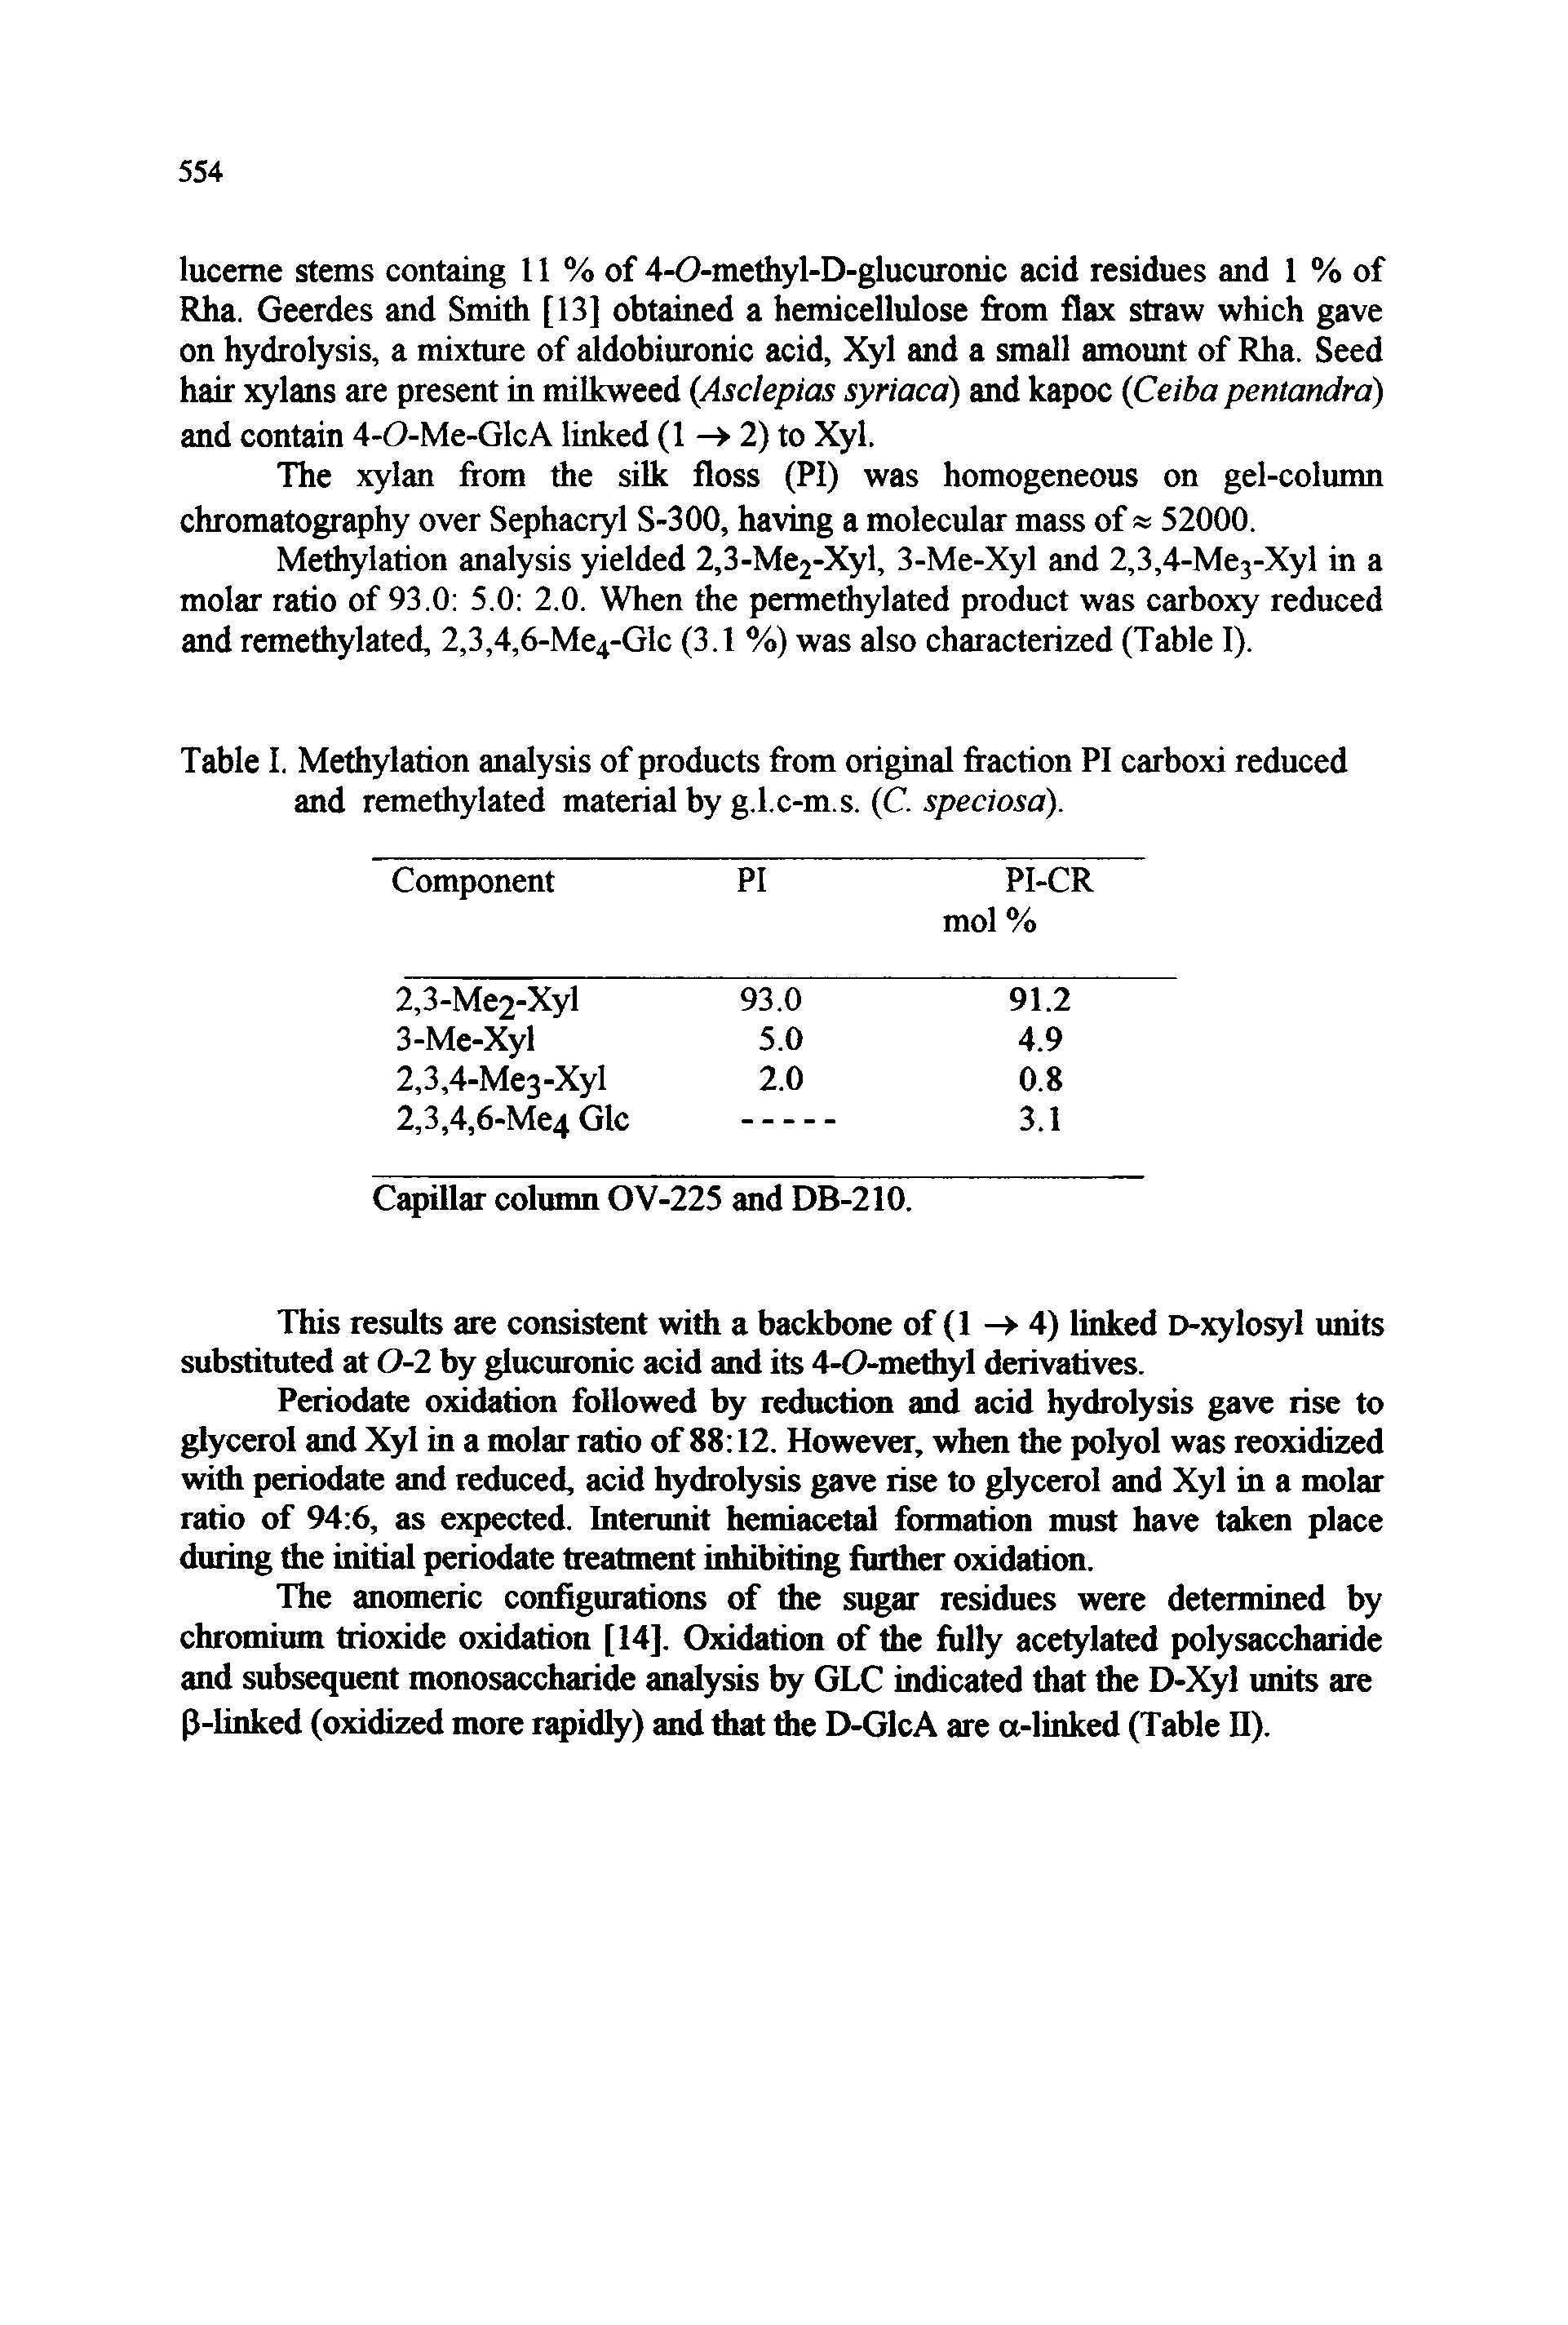 Table I. Methylation analysis of products from original fraction PI carboxi reduced and remethylated material by g.l.c-m.s. (C. speciosa).